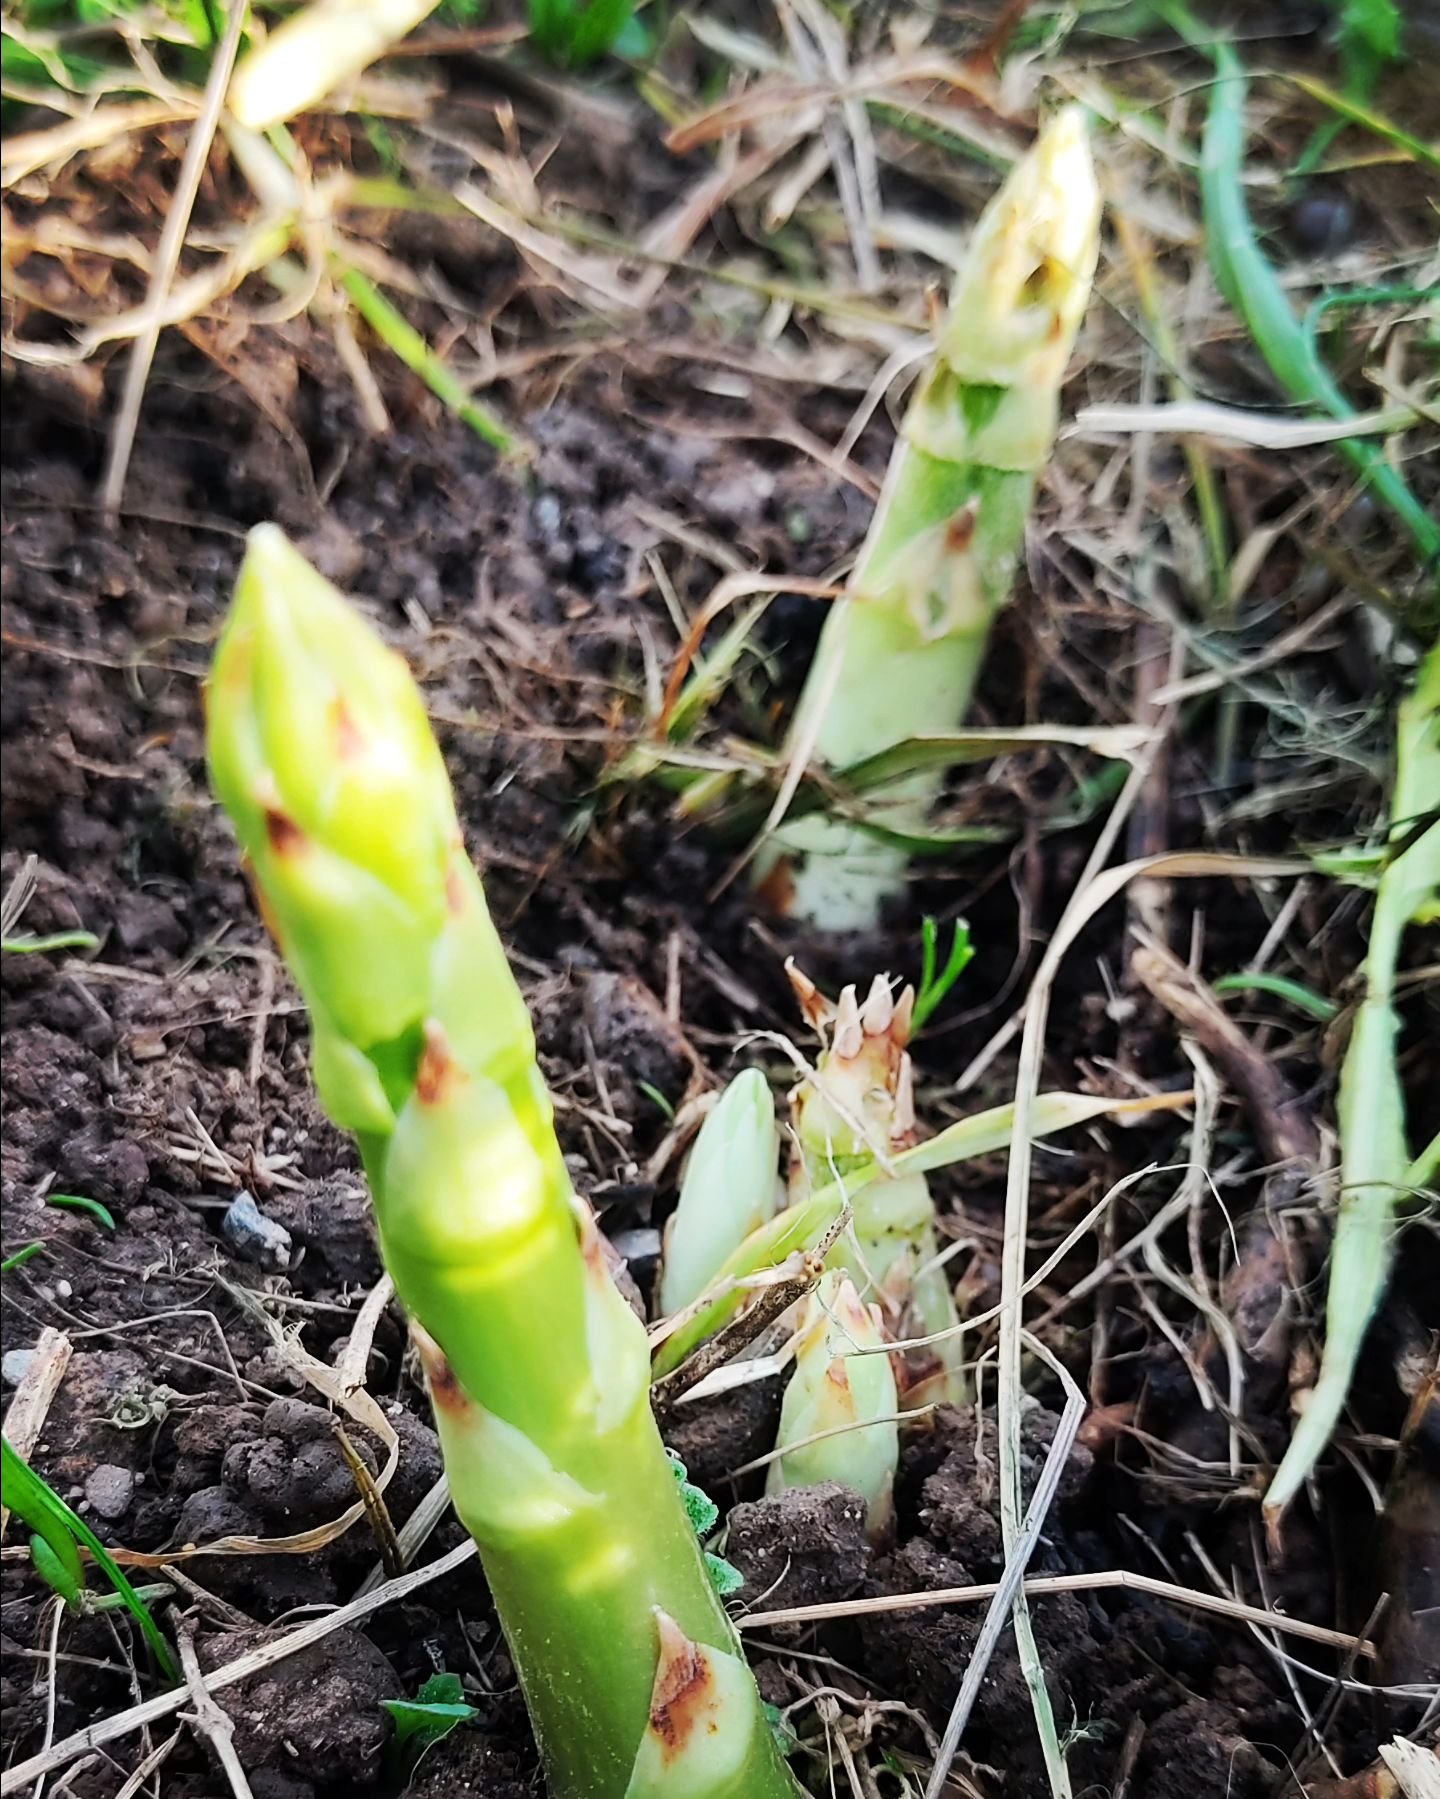 Finally going to be able to try some yummy Schmittengarten asparagus this year 
#spargelzeit #asparagusseason #loveyourkidneys💚 
#permaculture
#worththewait